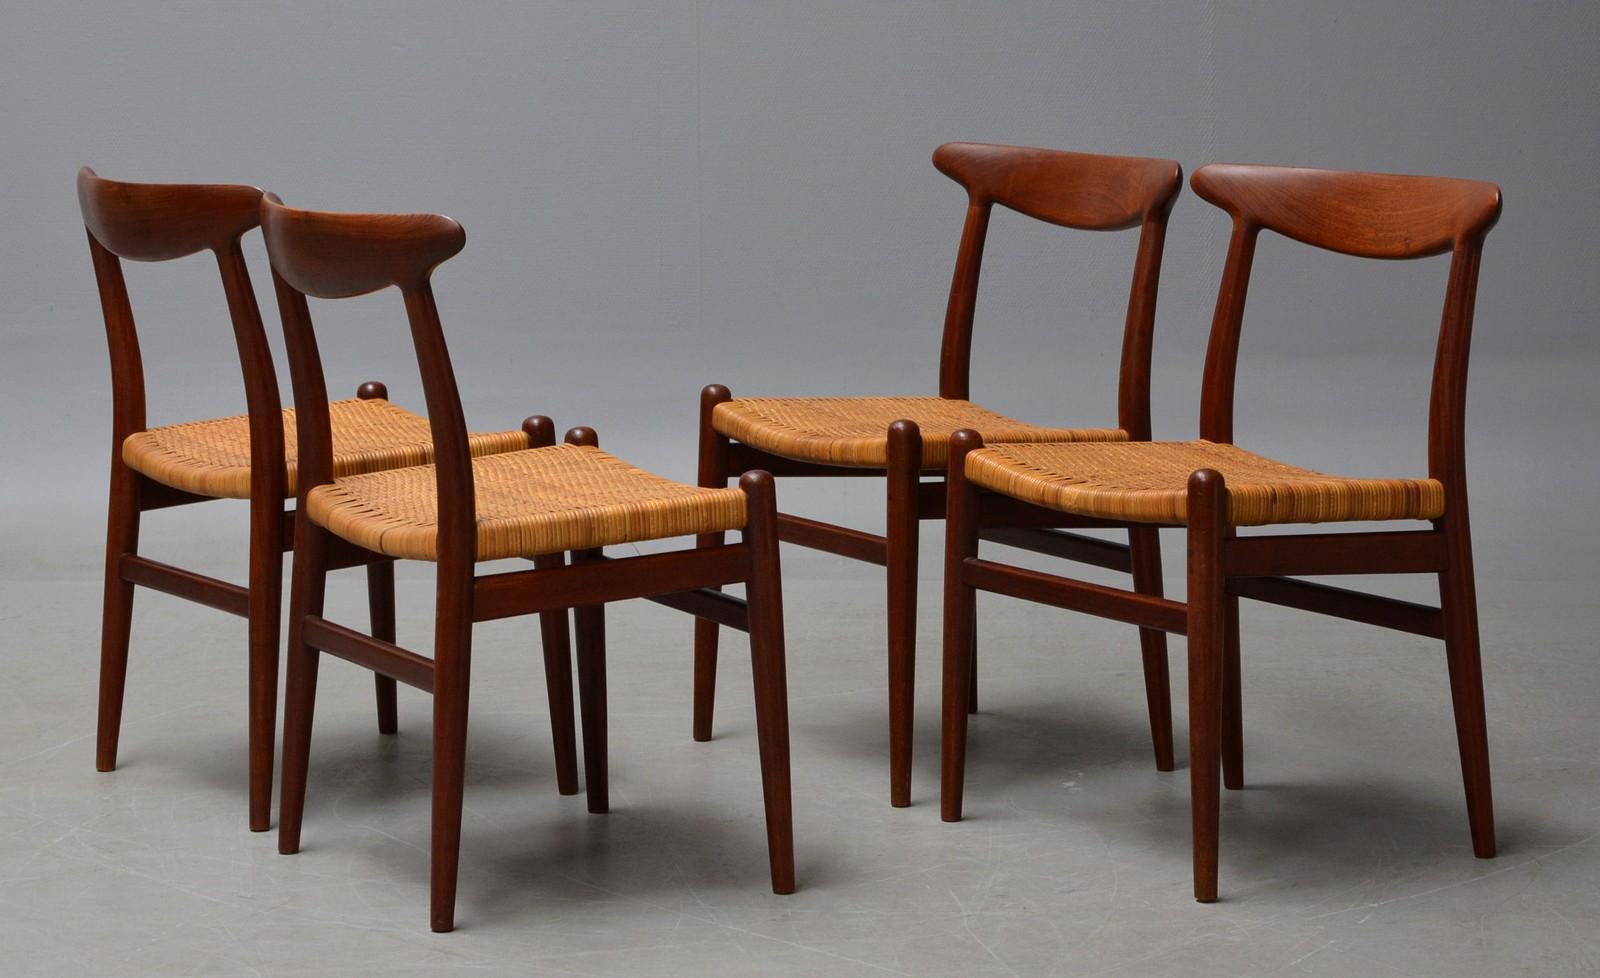 Hans J. Wegner, Dining Chairs Model W2 'Set of 4', Teak and Patinated Wicker In Excellent Condition For Sale In Roskilde, Sealand